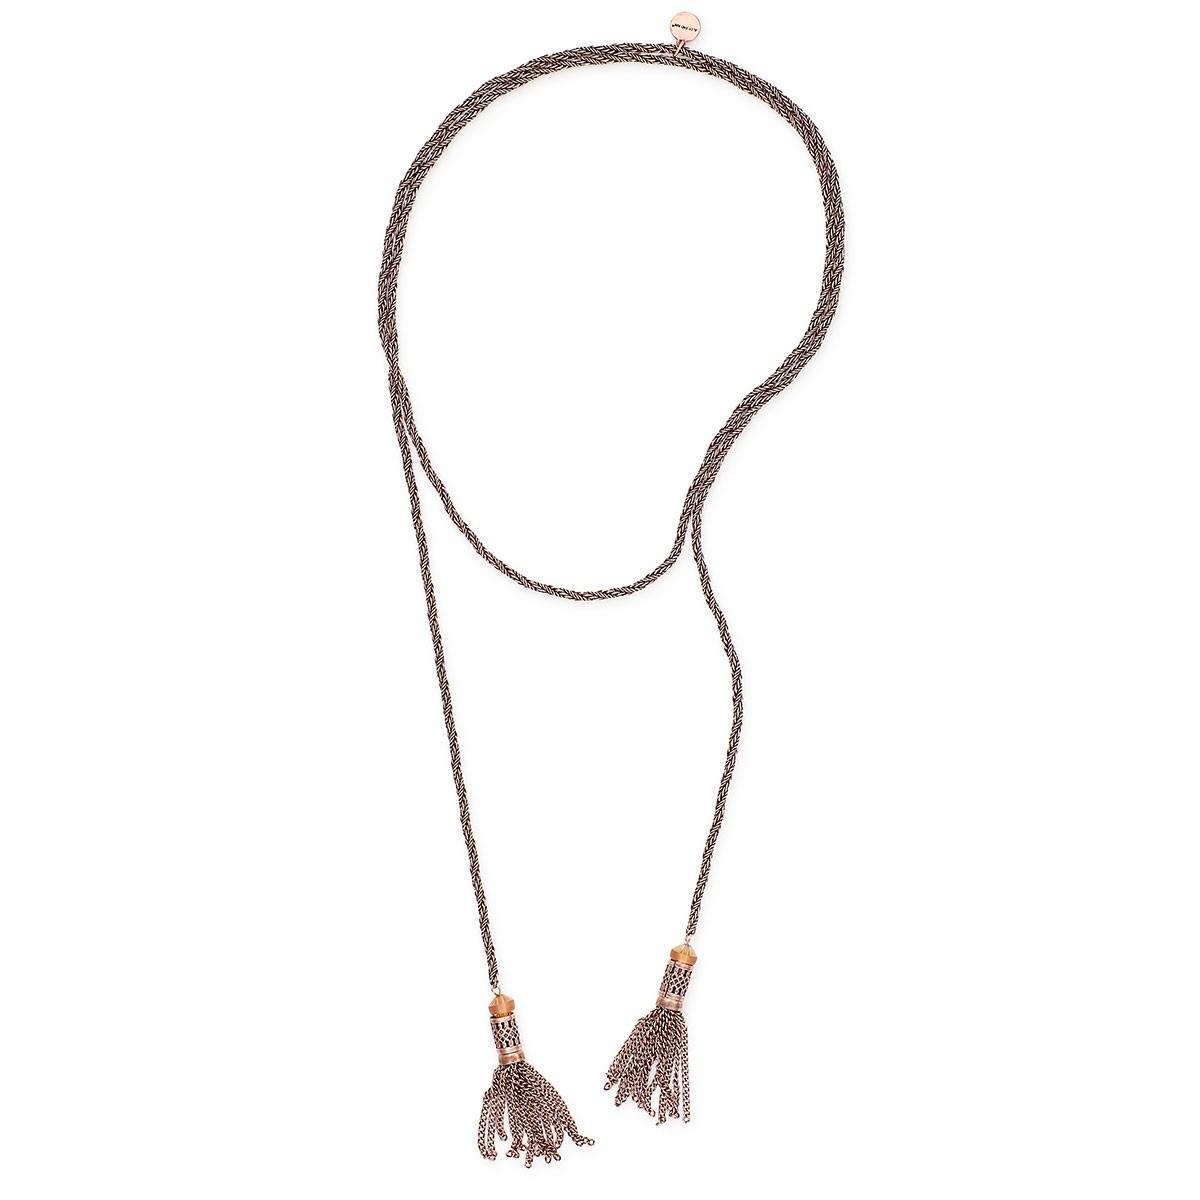 Lyst - Alex And Ani Holiday Tassel Wrap Necklace in Metallic